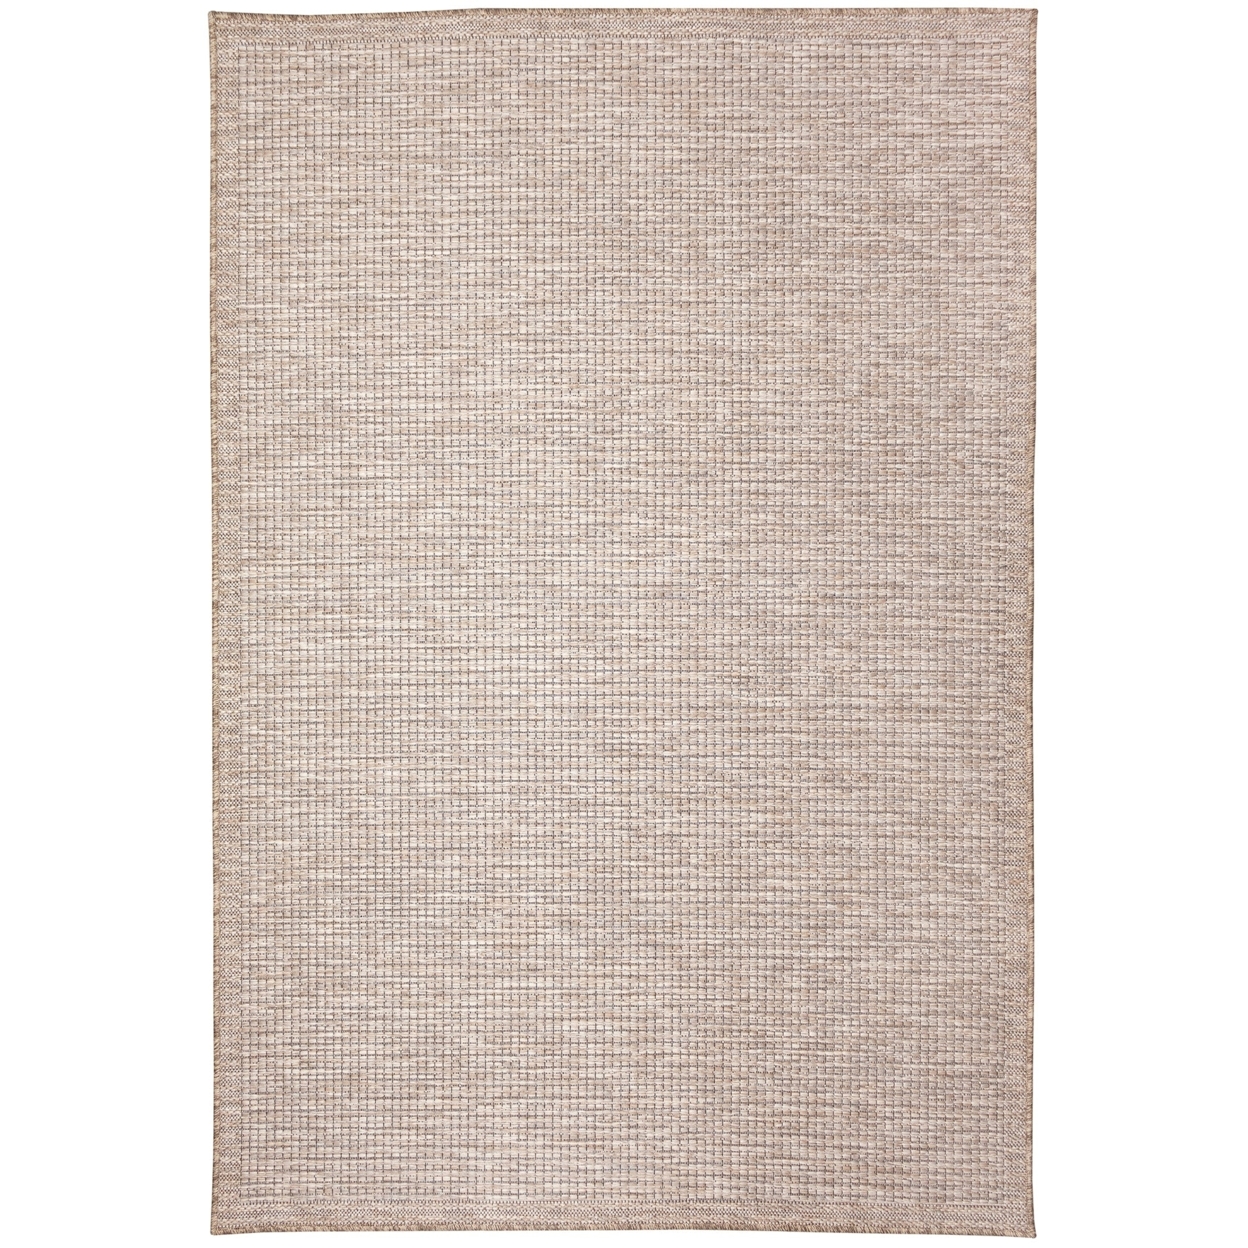 Liora Manne Orly Texture Indoor Outdoor Area Rug Natural - 6'6 X 9'3